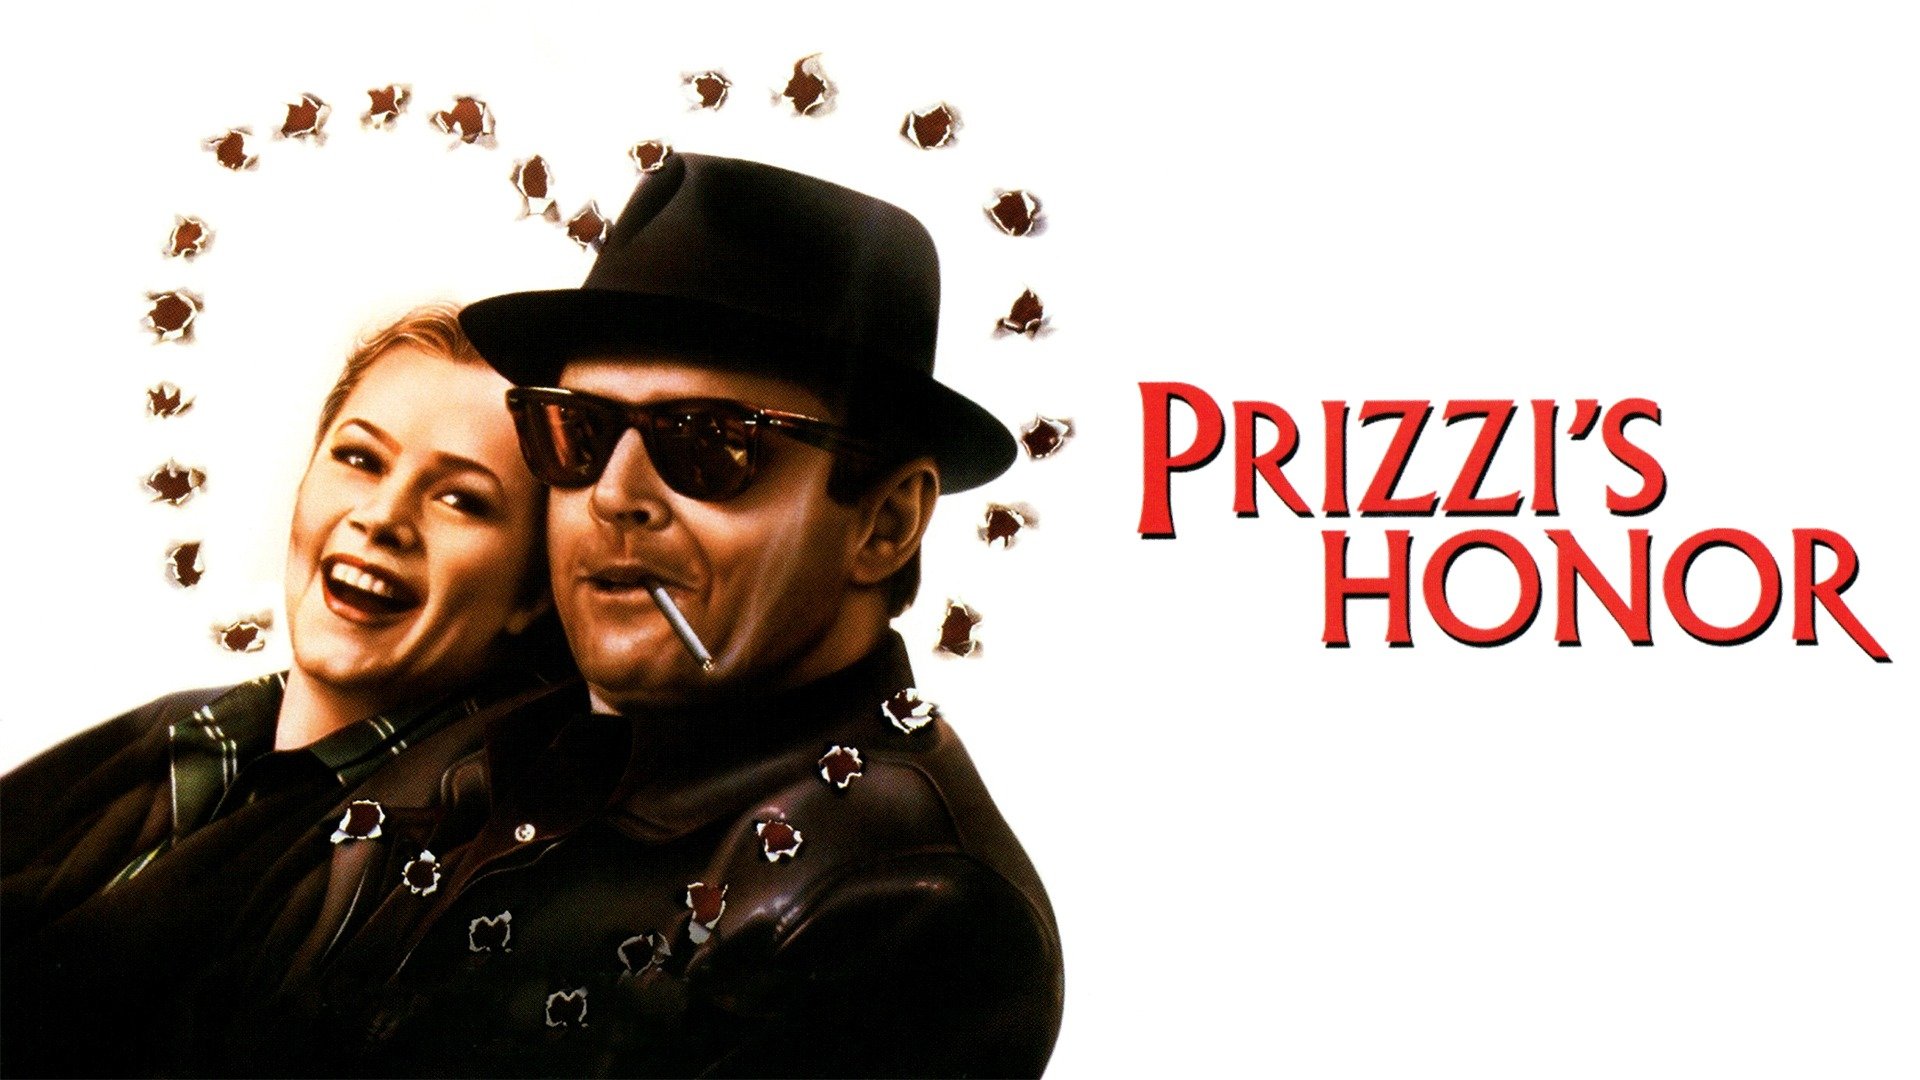 32-facts-about-the-movie-prizzis-honor